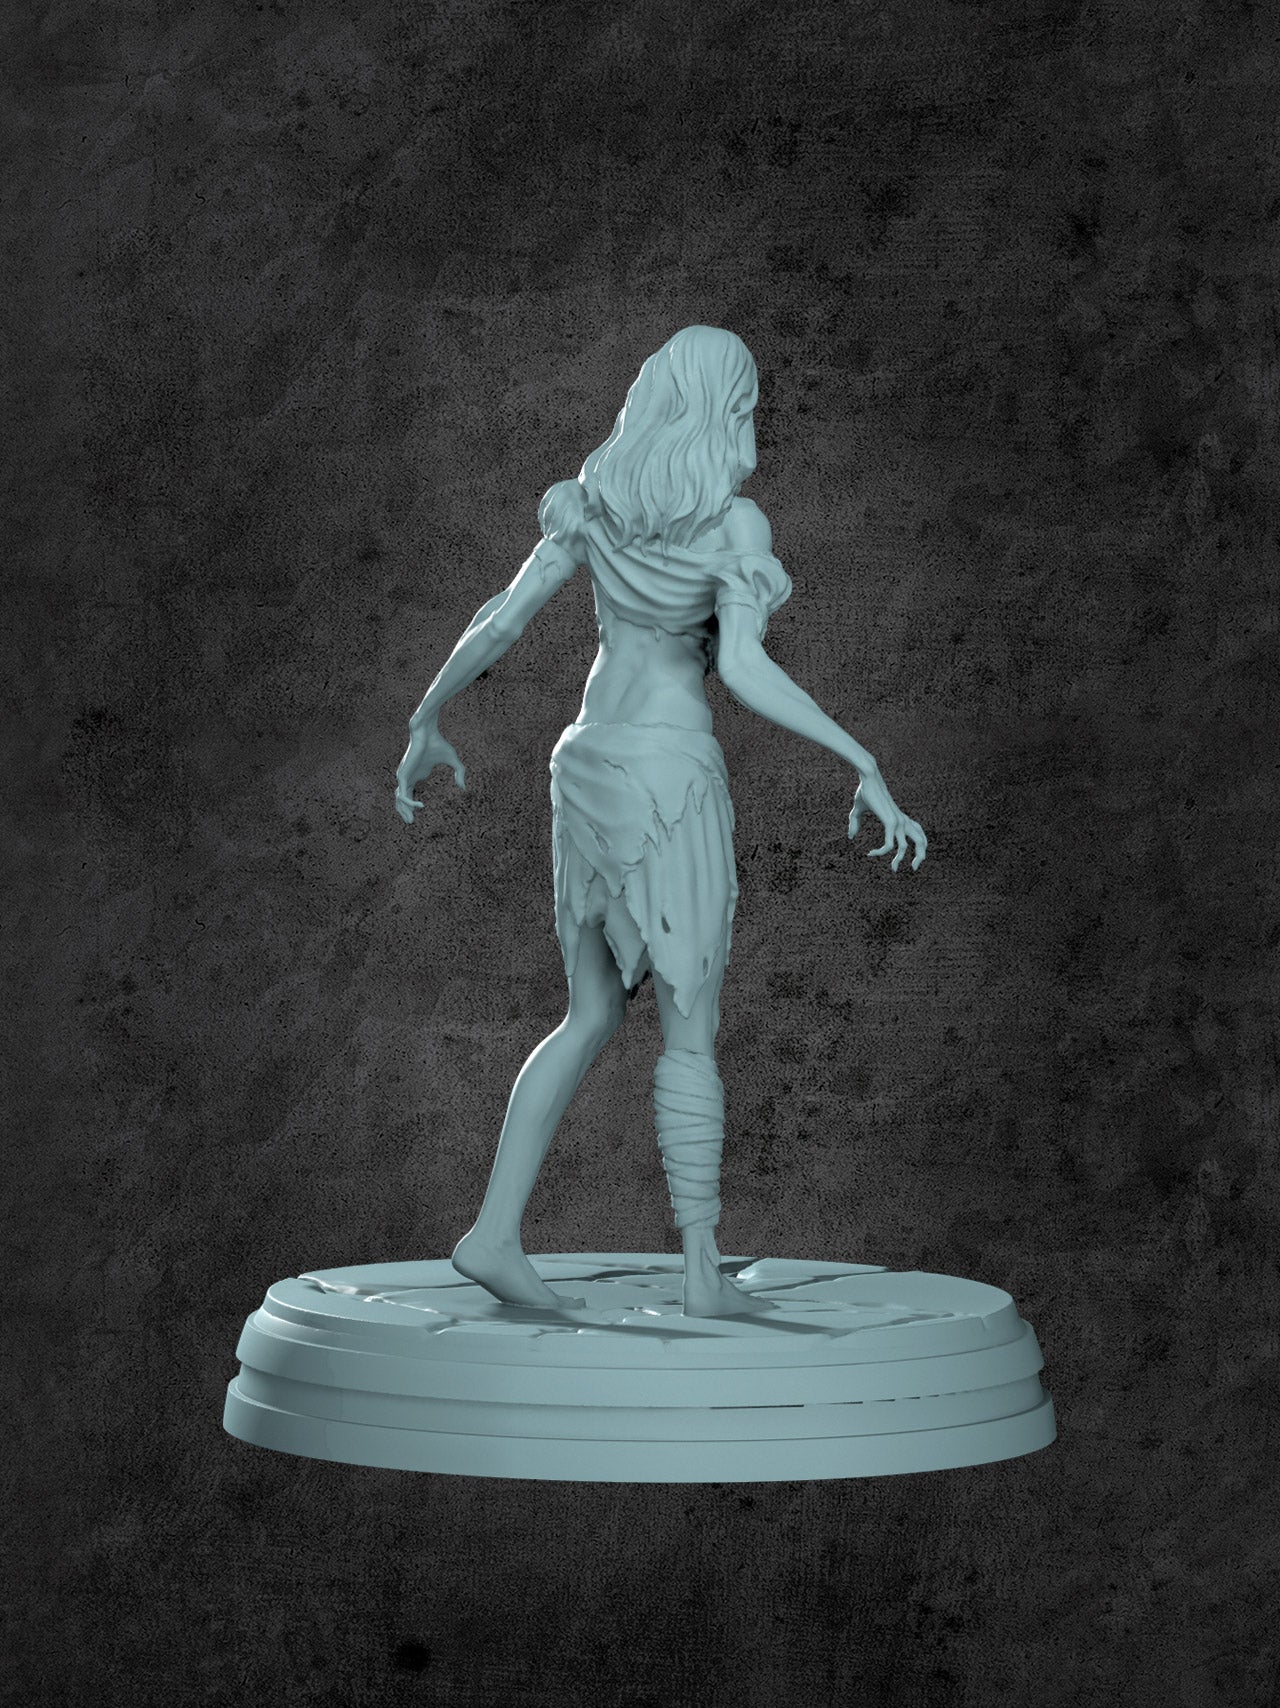 Vampire Spawn Miniature for Tabletop RPGs